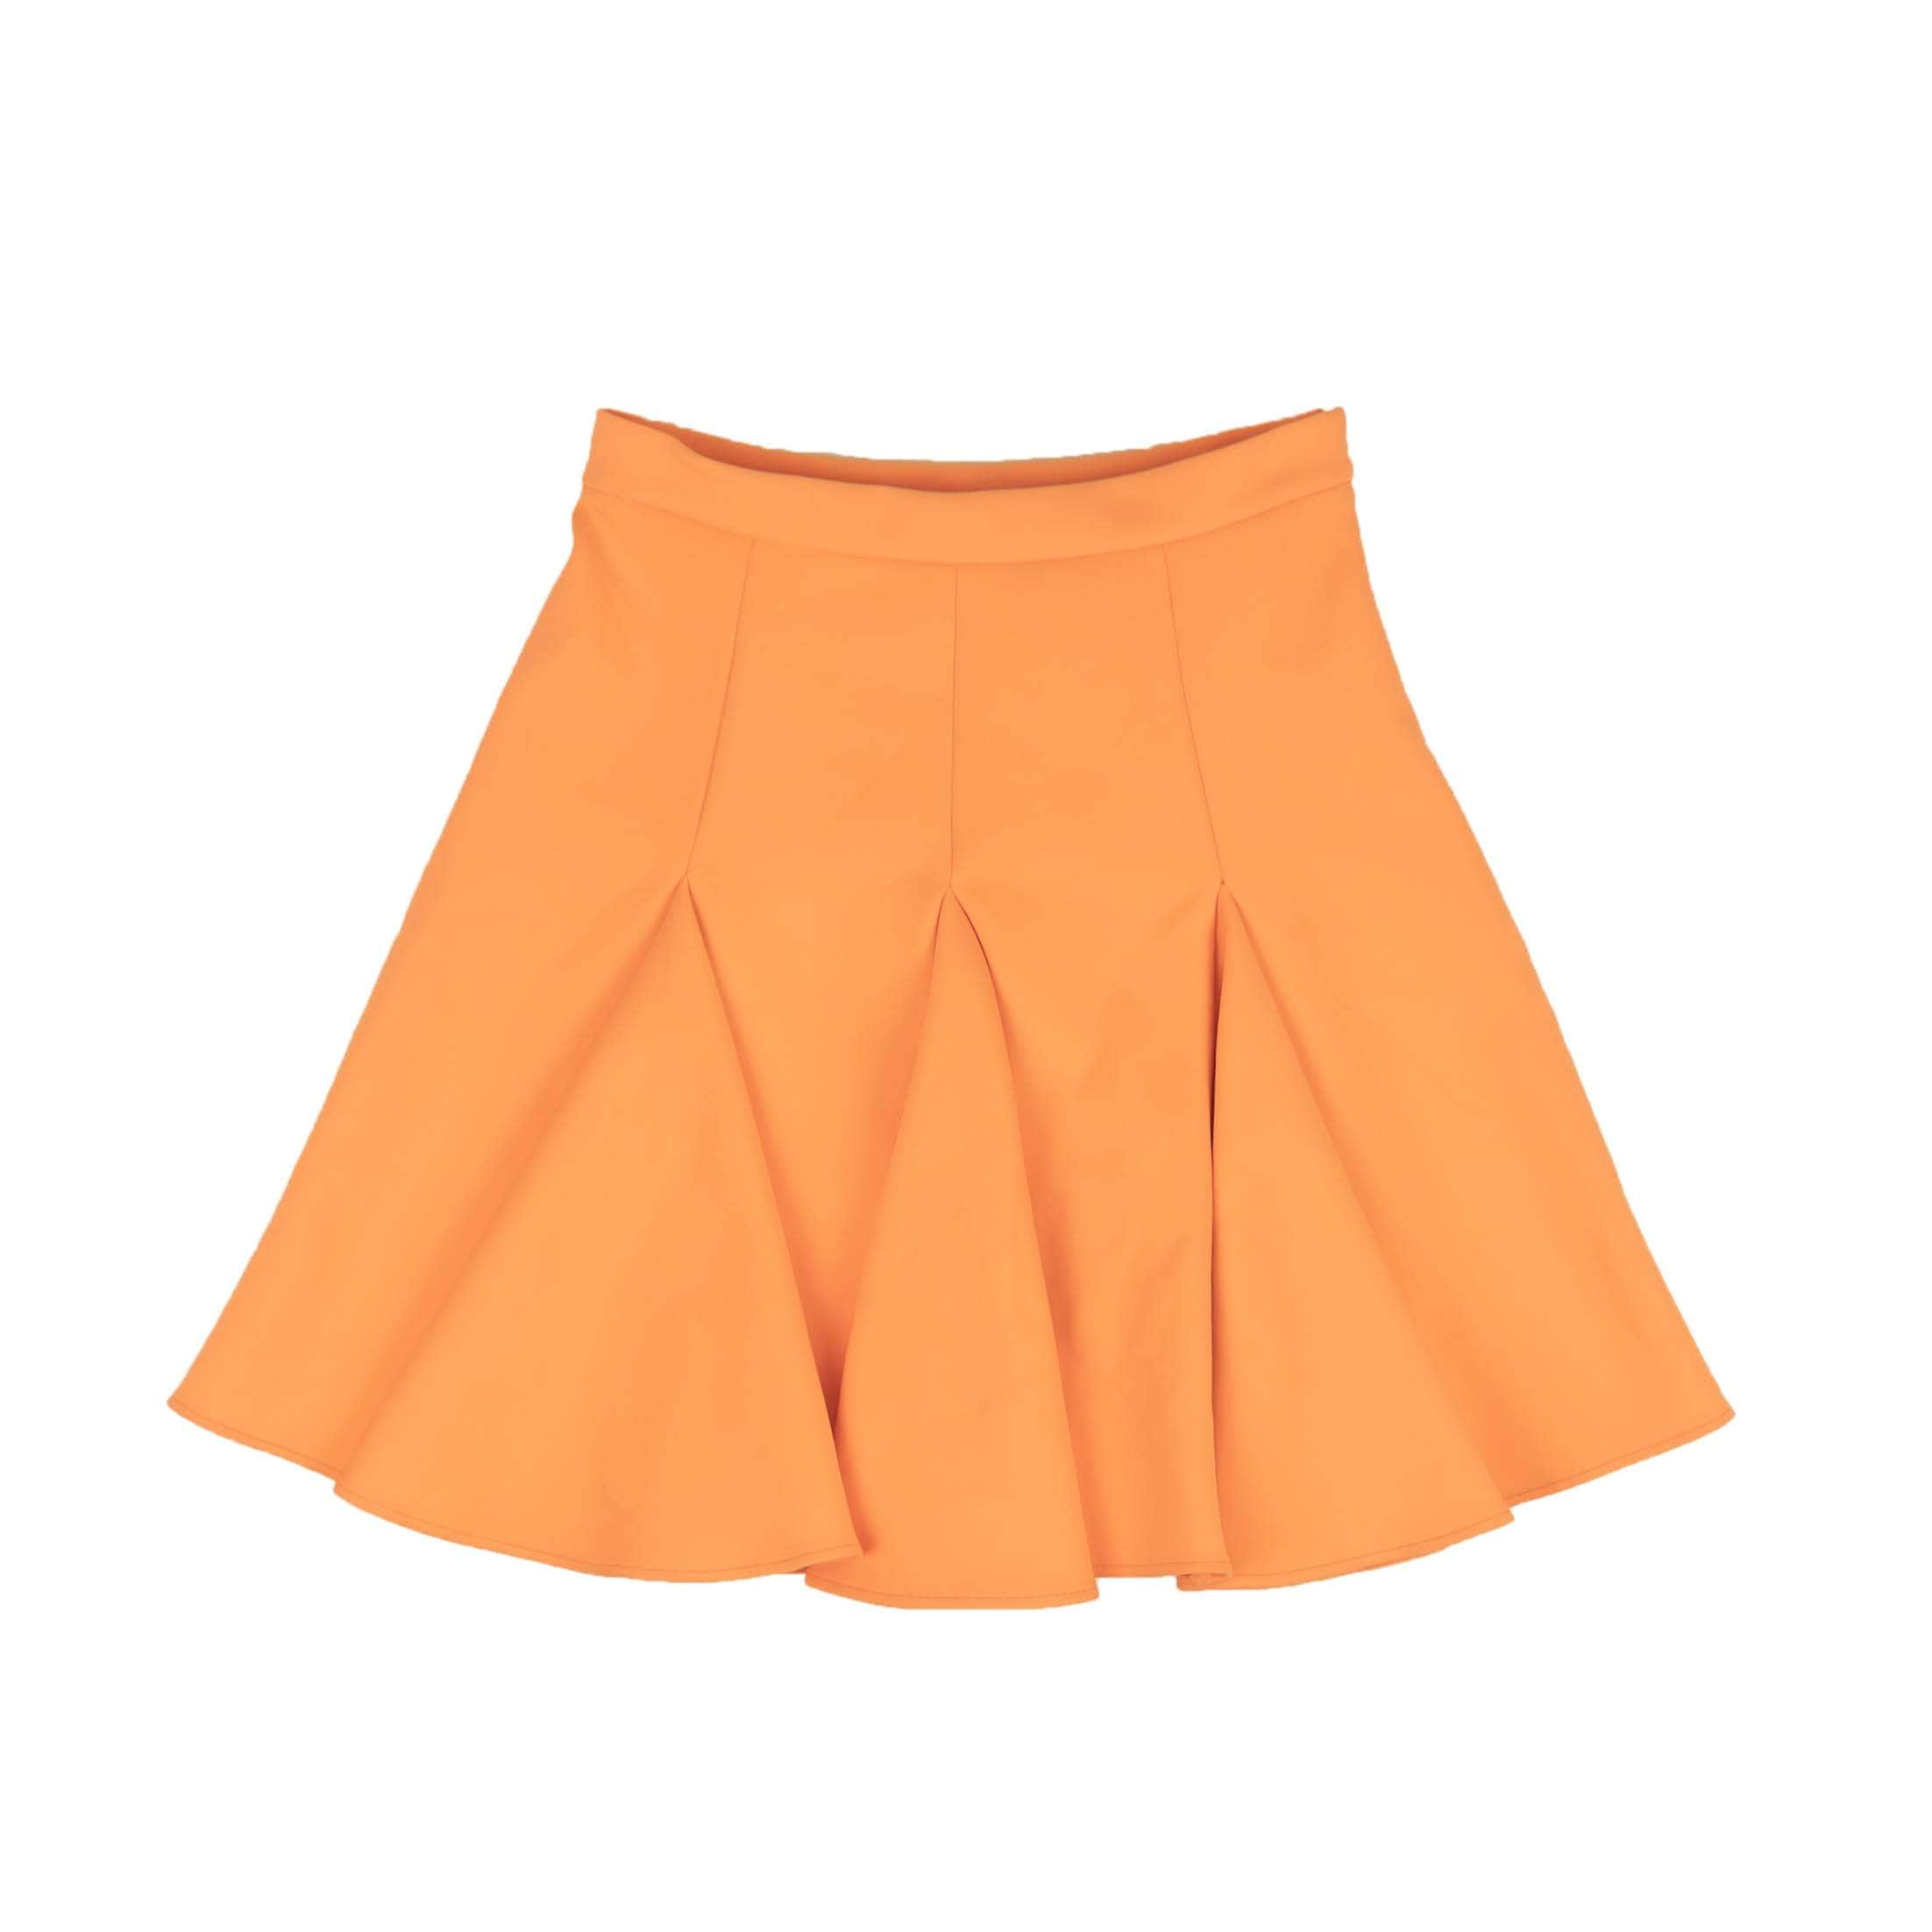 OFF-WHITE c/o VIRGIL ABLOH 500-750, channelenable-all, chicmi, couponcollection, gender-womens, main-clothing, off-white-c-o-virgil-abloh, OWW, size-40, womens-mini-skirts 40 Orange Scuba Skater Skirt 95-OFW-0108/40 95-OFW-0108/40